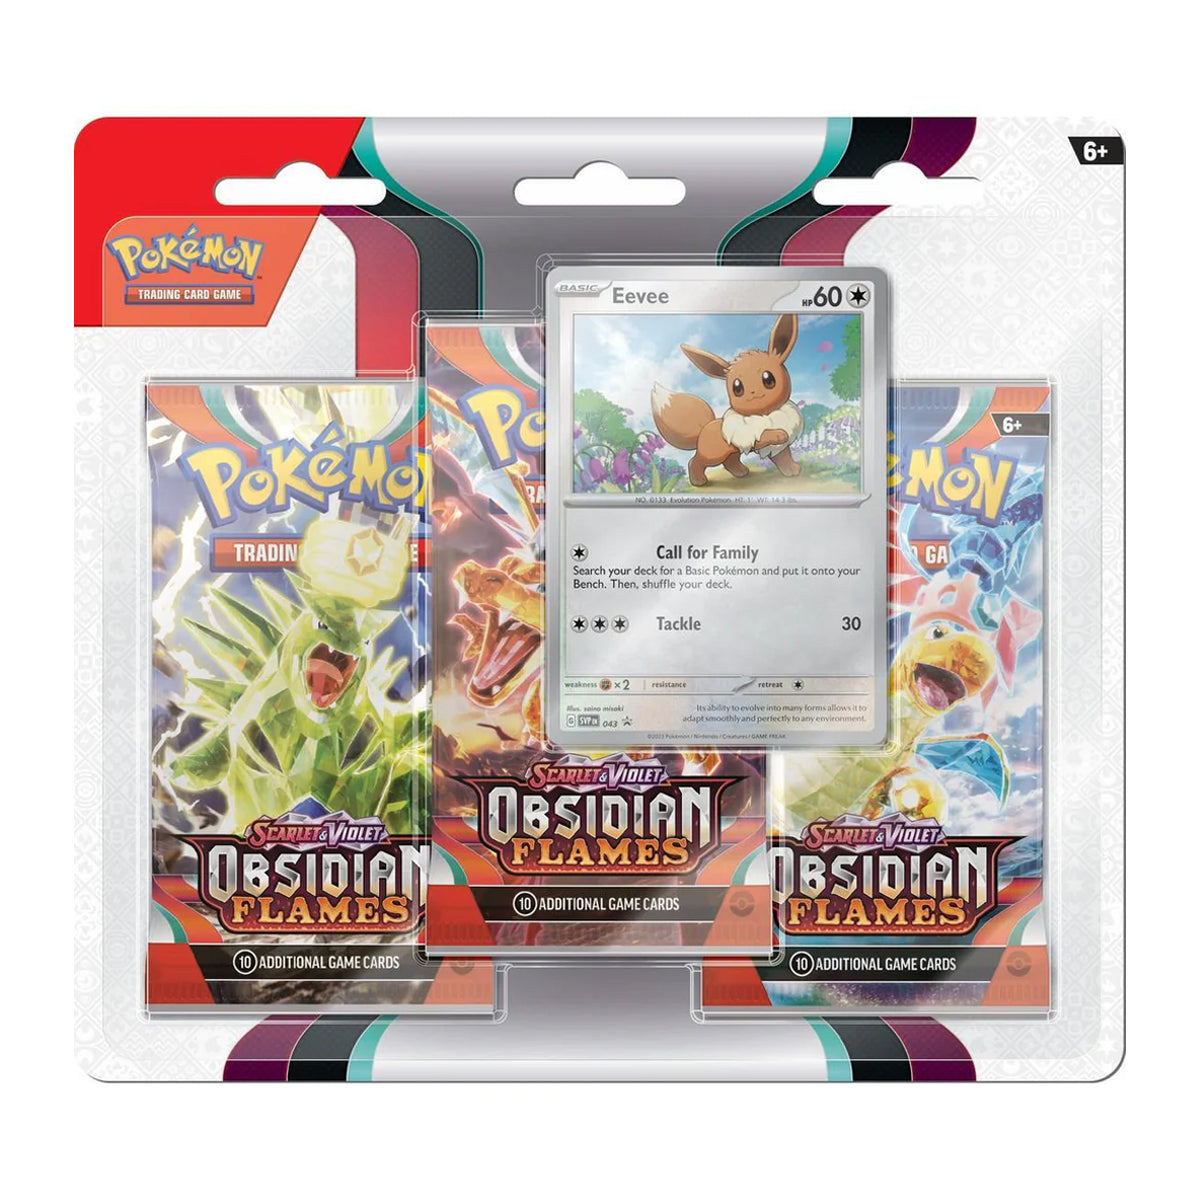 Obsidian Flames 3 Pack Booster Blister (Eevee)